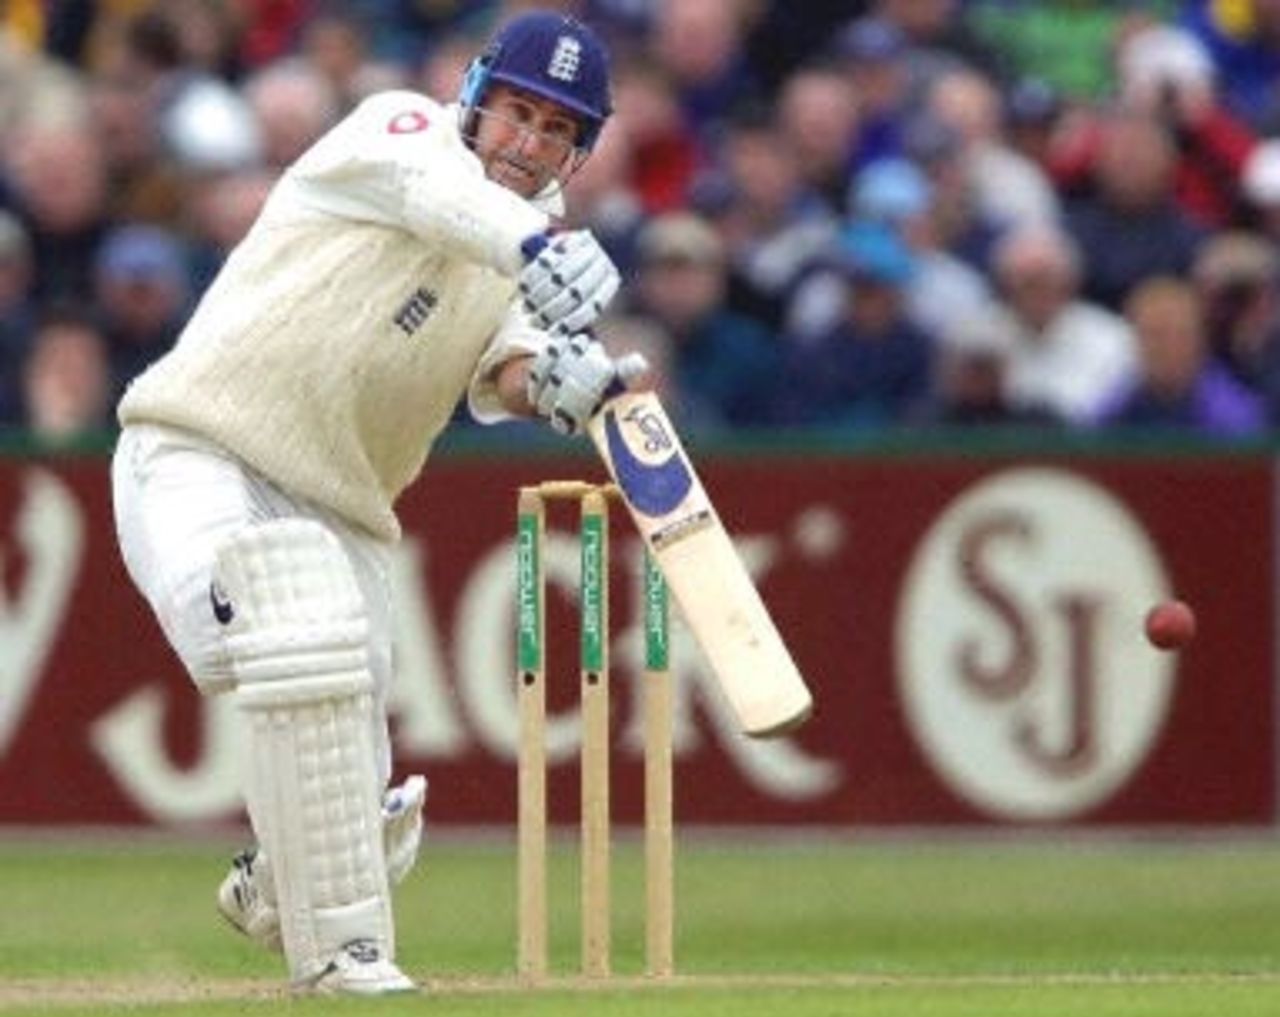 Graham Thorpe driving the ball, day 2, 2nd Test at Old Trafford, 17-21 May 2001.